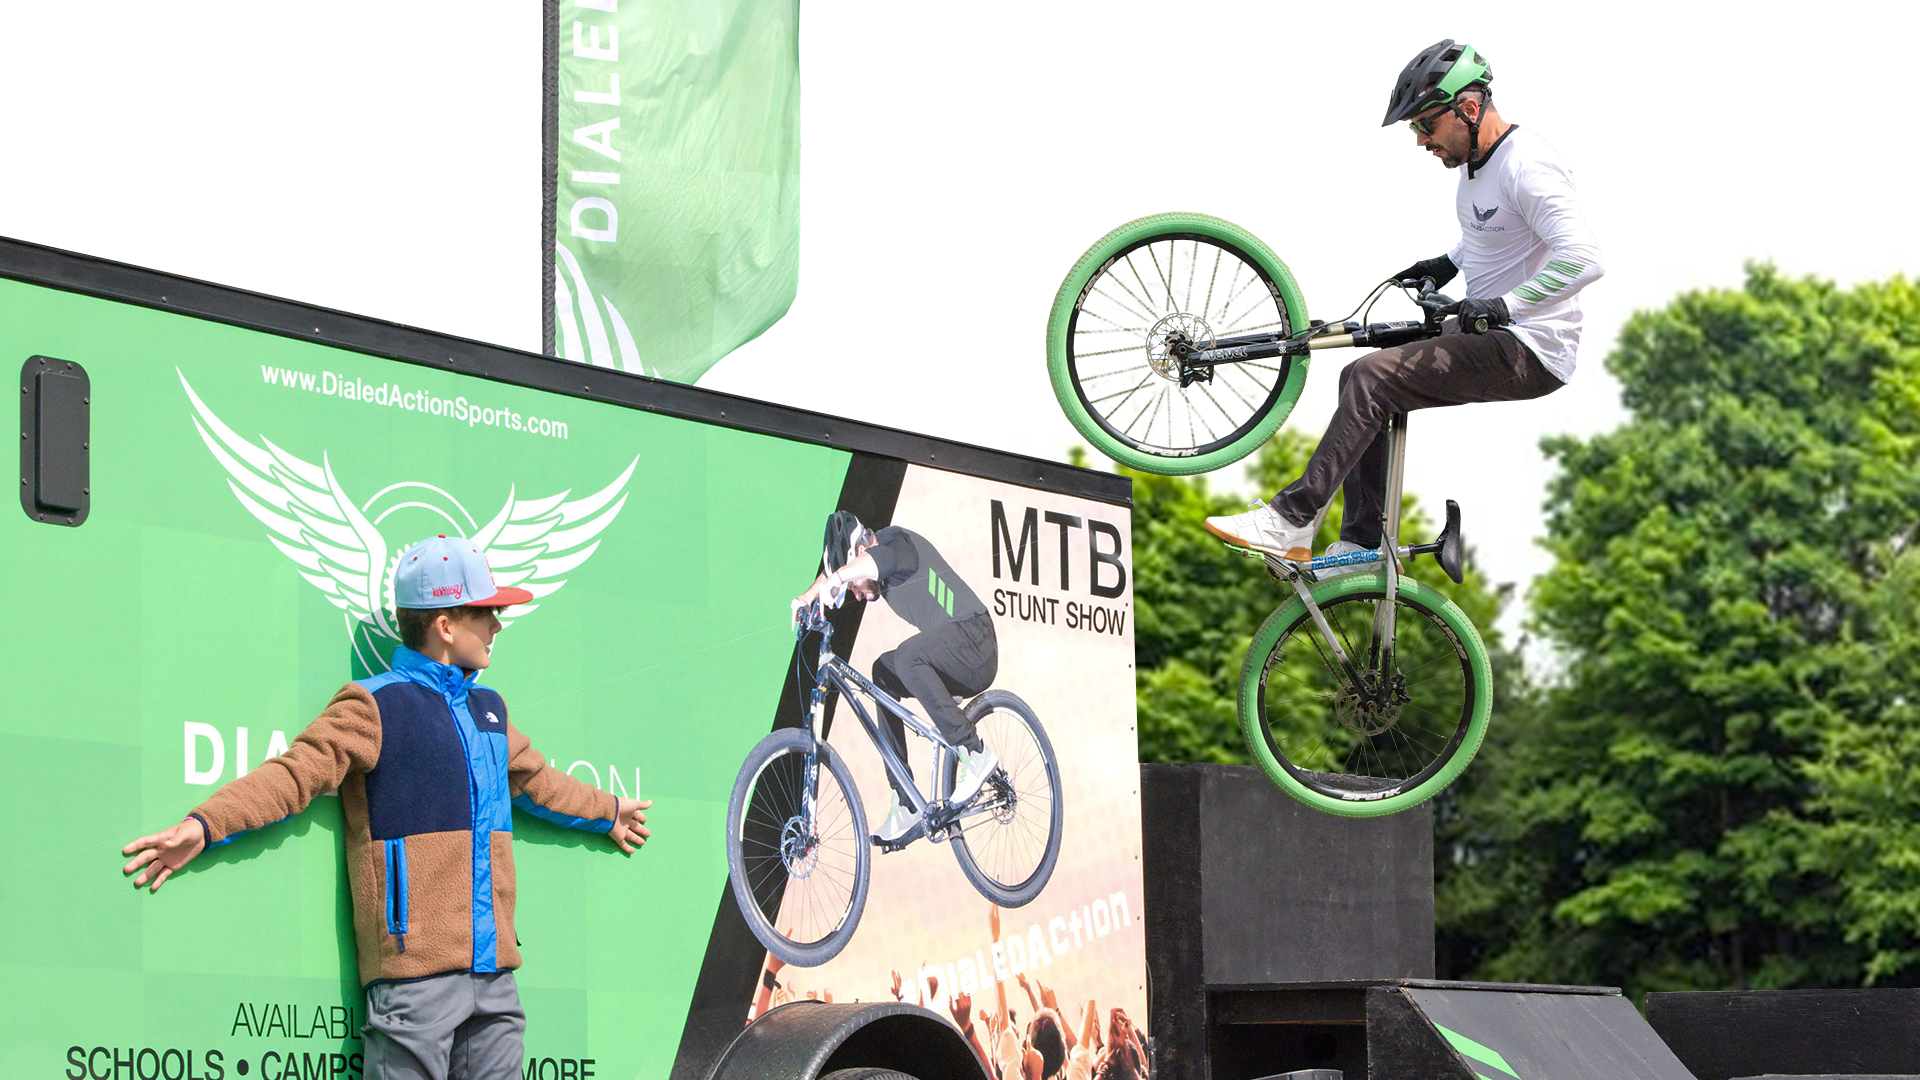 A 7ft high jump to the roof of our MTB performance rig at the Subaru Outdoor Experience in Dayton Ohio